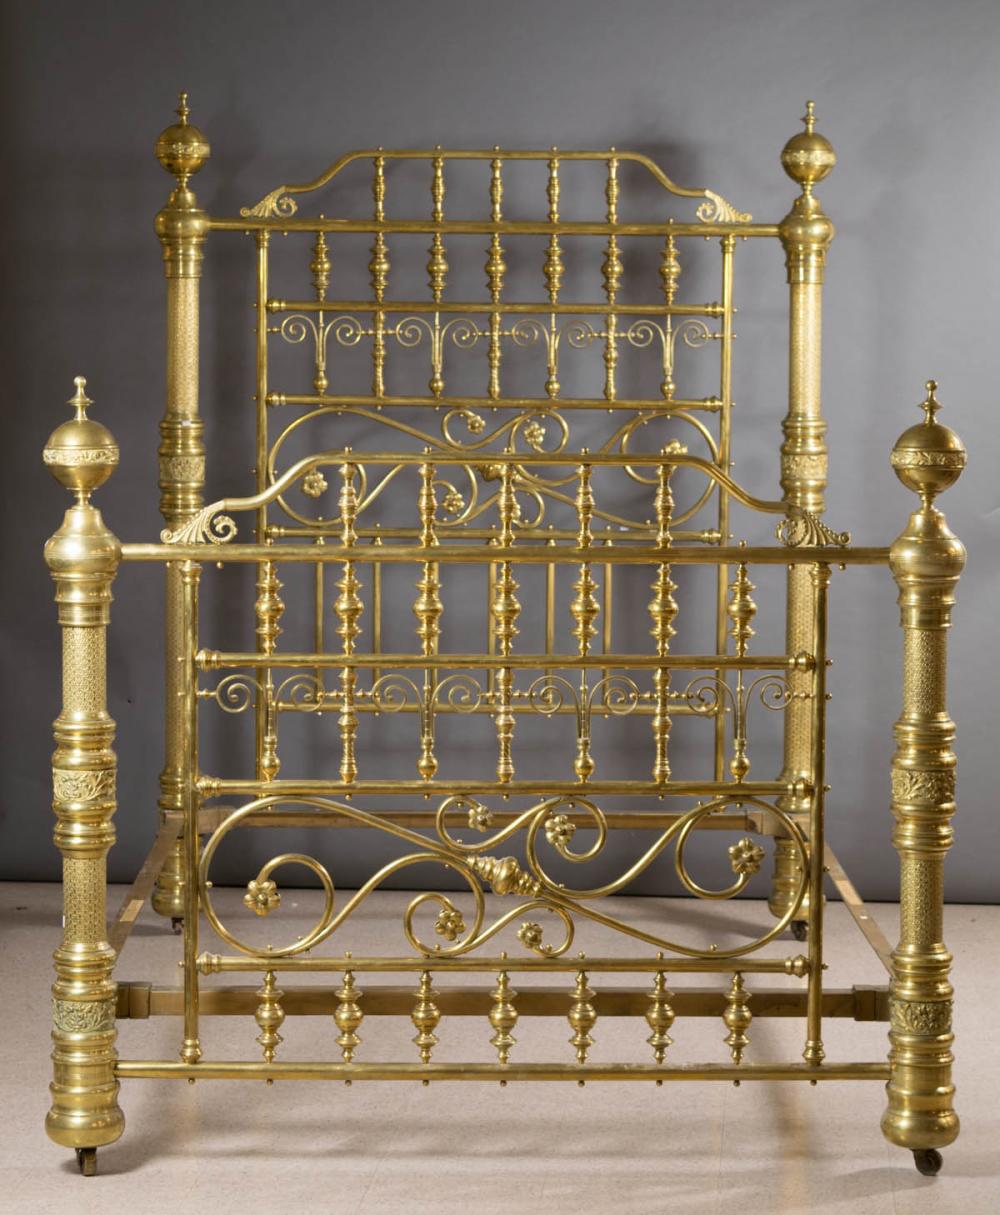 ORNATE VICTORIAN BRASS BED WITH 33e83d